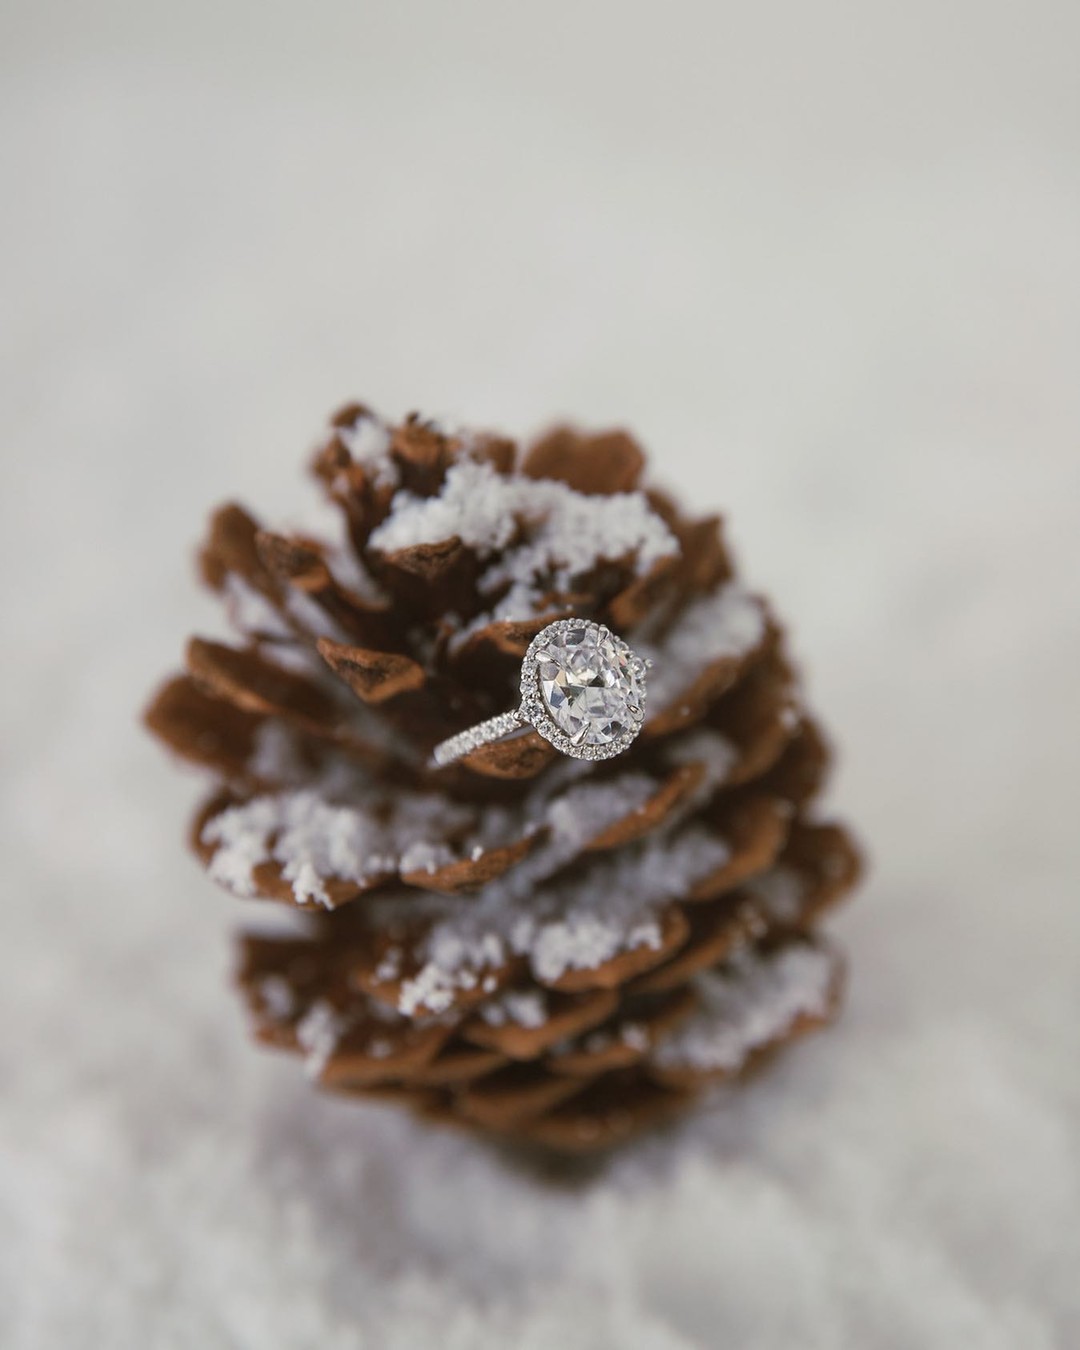 Have you met our Classic Cathedral Halo Pavé Engagement Ring❄😌
💍ring: 18009P
.
.
.
#jamesallen #jamesallenrings #diamond #diamonds #diamondring #engaged #engagement #engagementring #isaidyes #ringinspo #holidayseason #winter #winterstyle #winterengagement